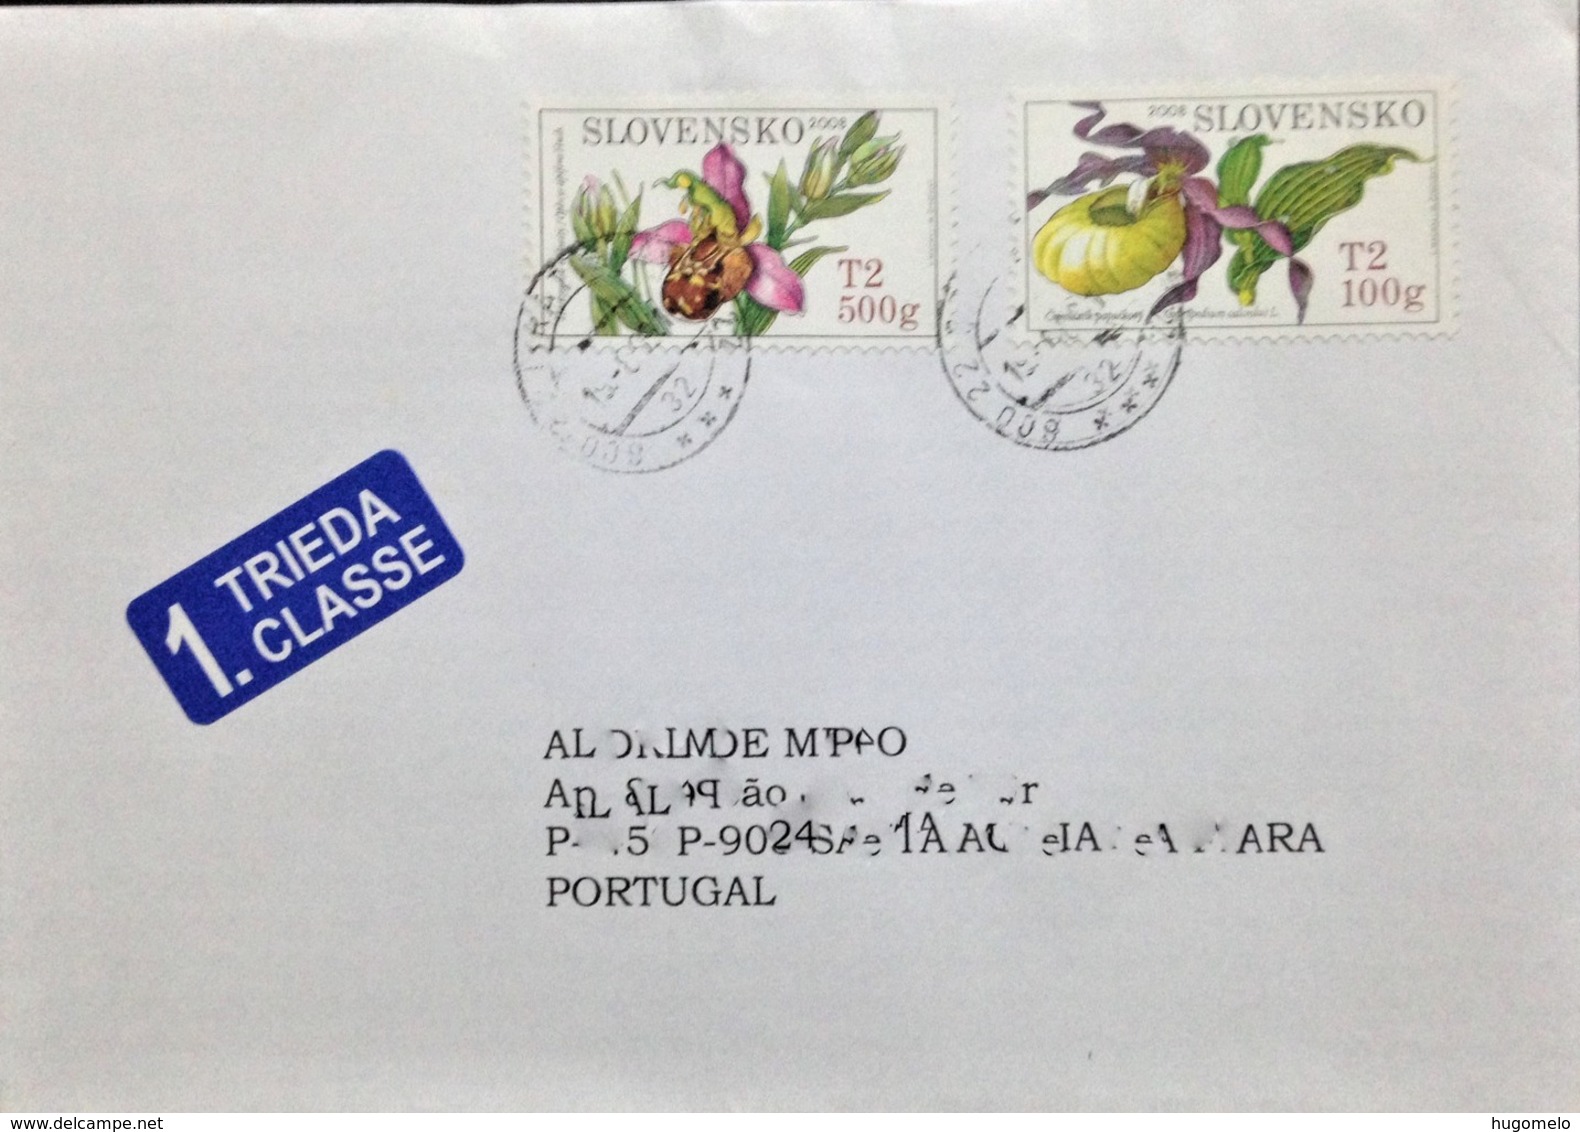 Slovakia, Circulated Cover To Portugal, "Nature", "Flora", Flowers", "Orchids", 2009 - Covers & Documents